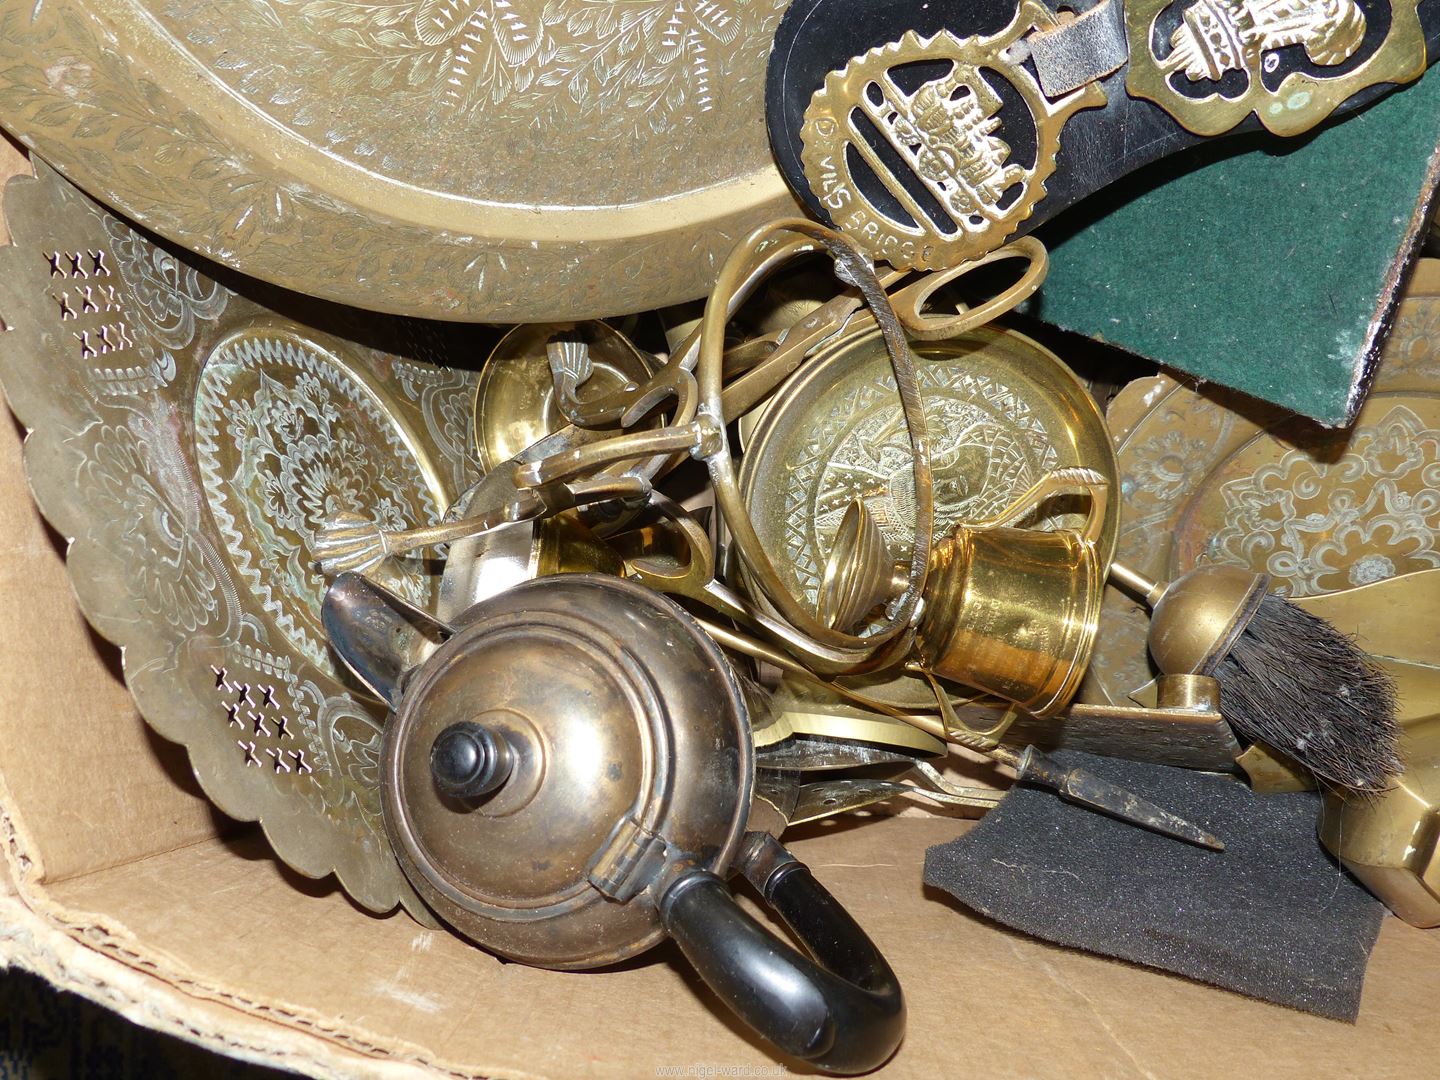 A good quantity of brass and plate including companion set, hot water jug, horse brasses, - Image 2 of 3